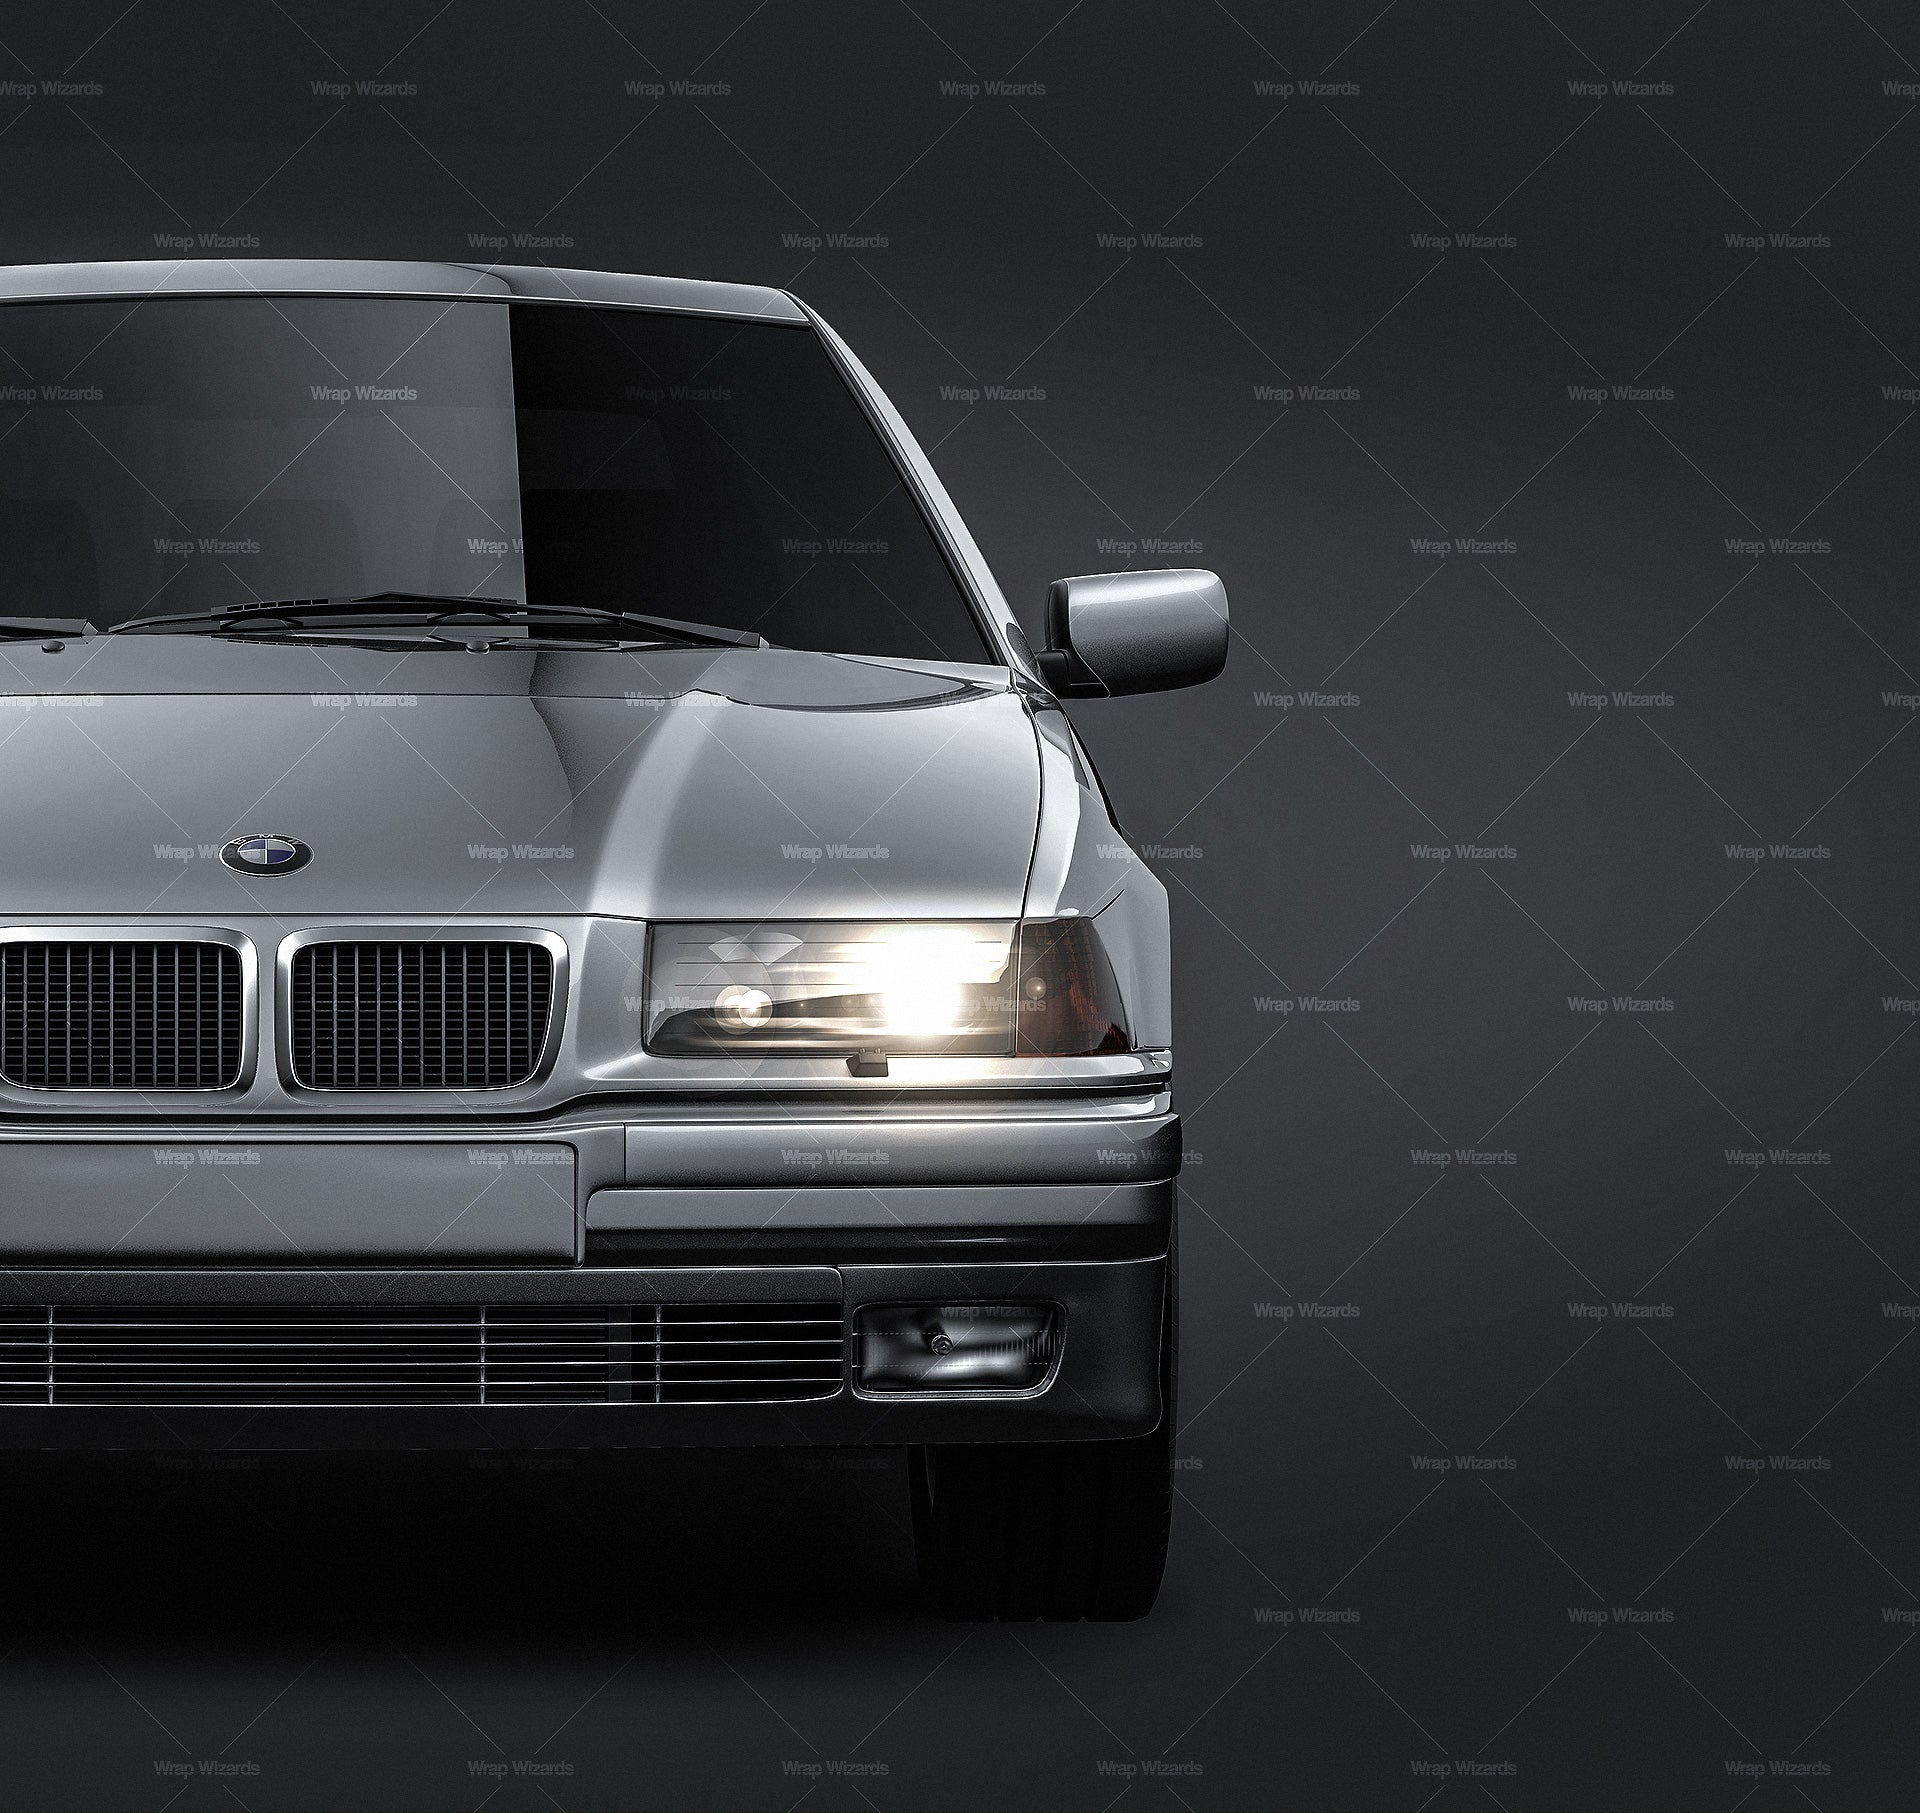 BMW 3-series E36 Touring 1990 glossy finish - all sides Car Mockup Template.psd